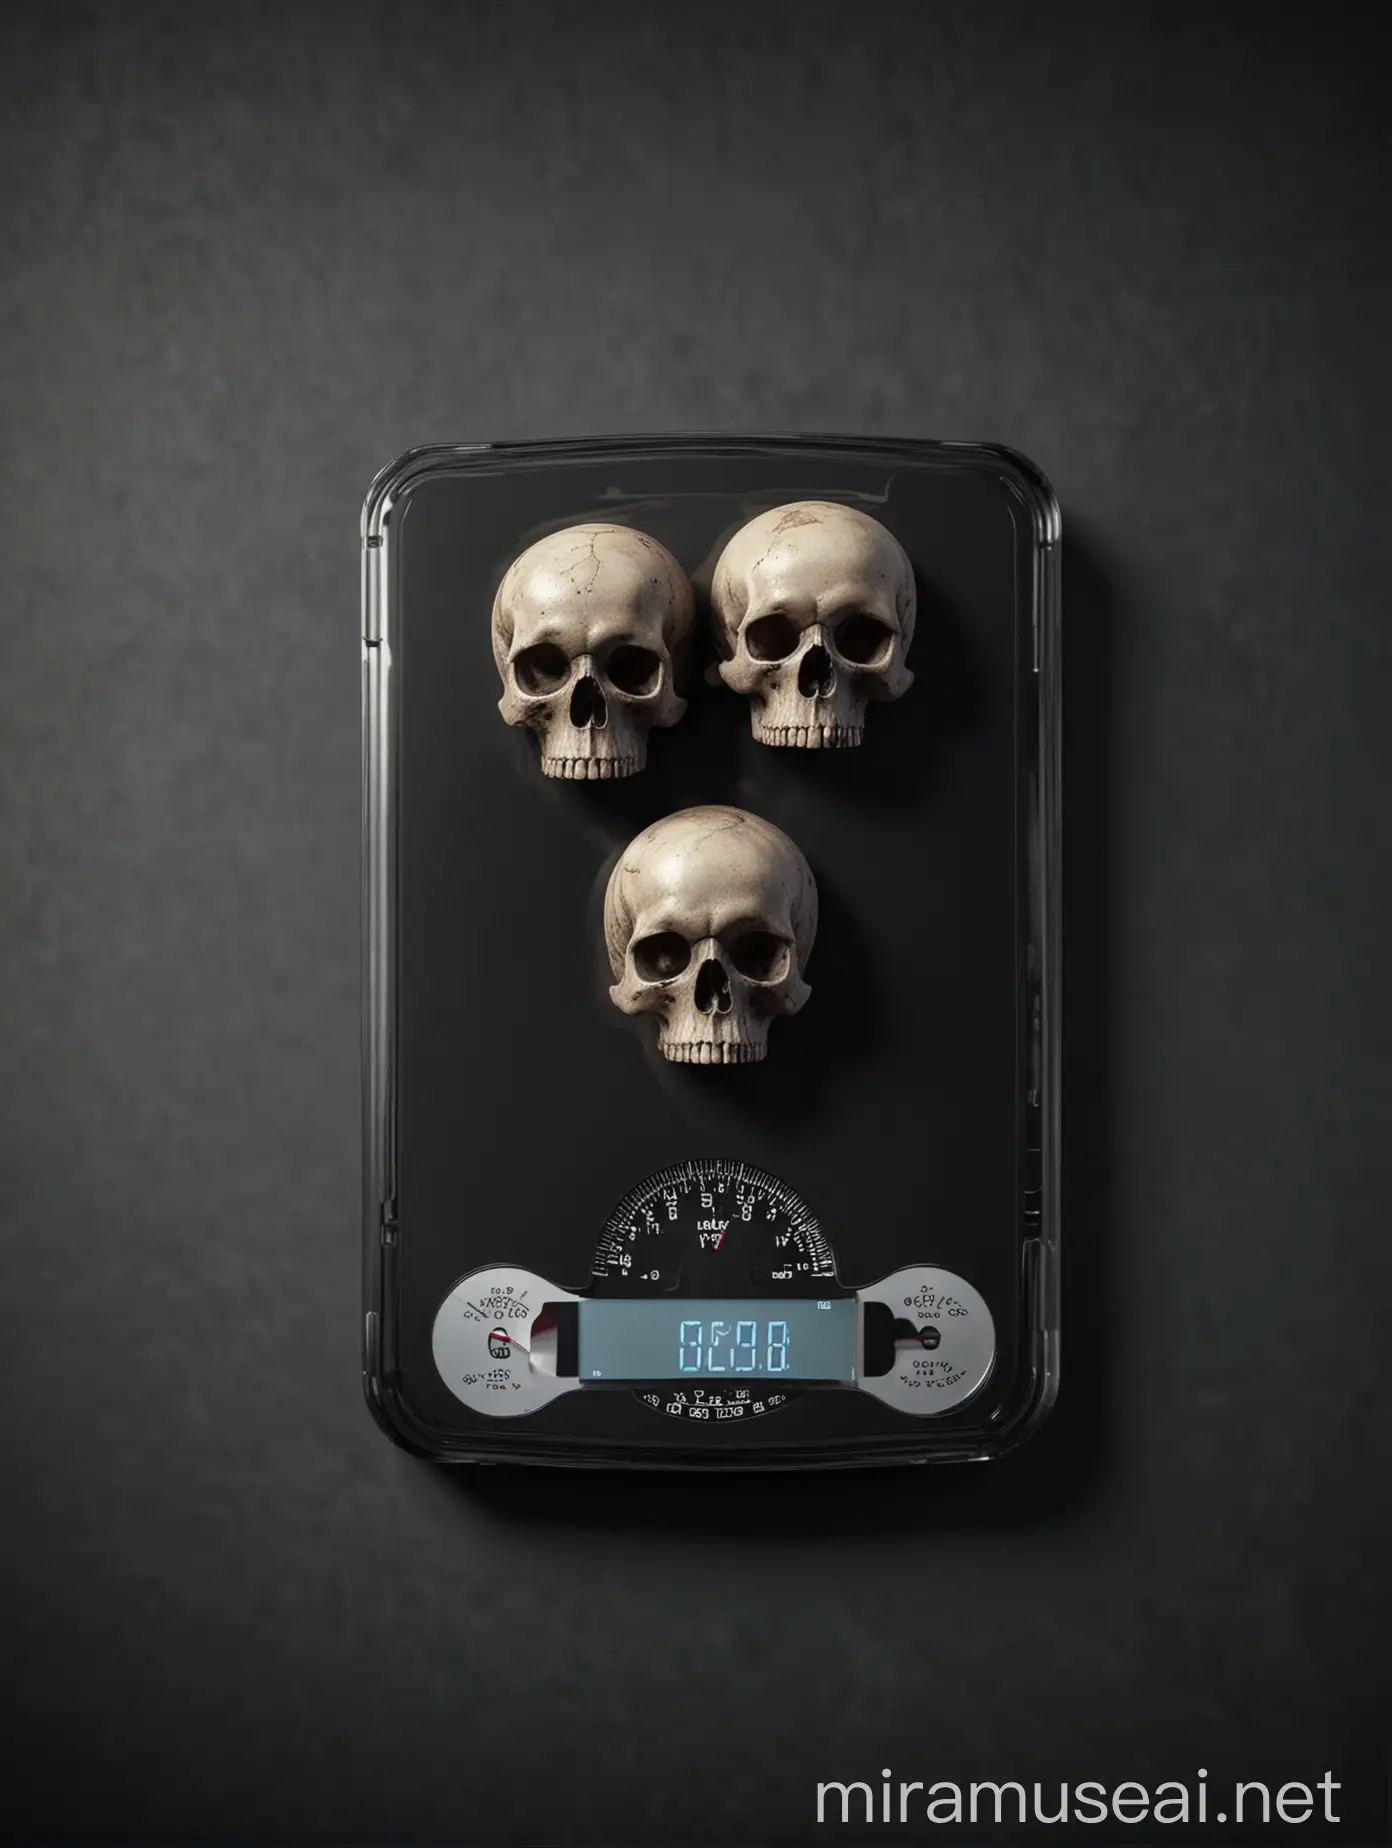 ULTRA REALISTIC high definition, 3d black digital pocket scale, with 3 skulls on top of it on a dark background, in cinematic lighting